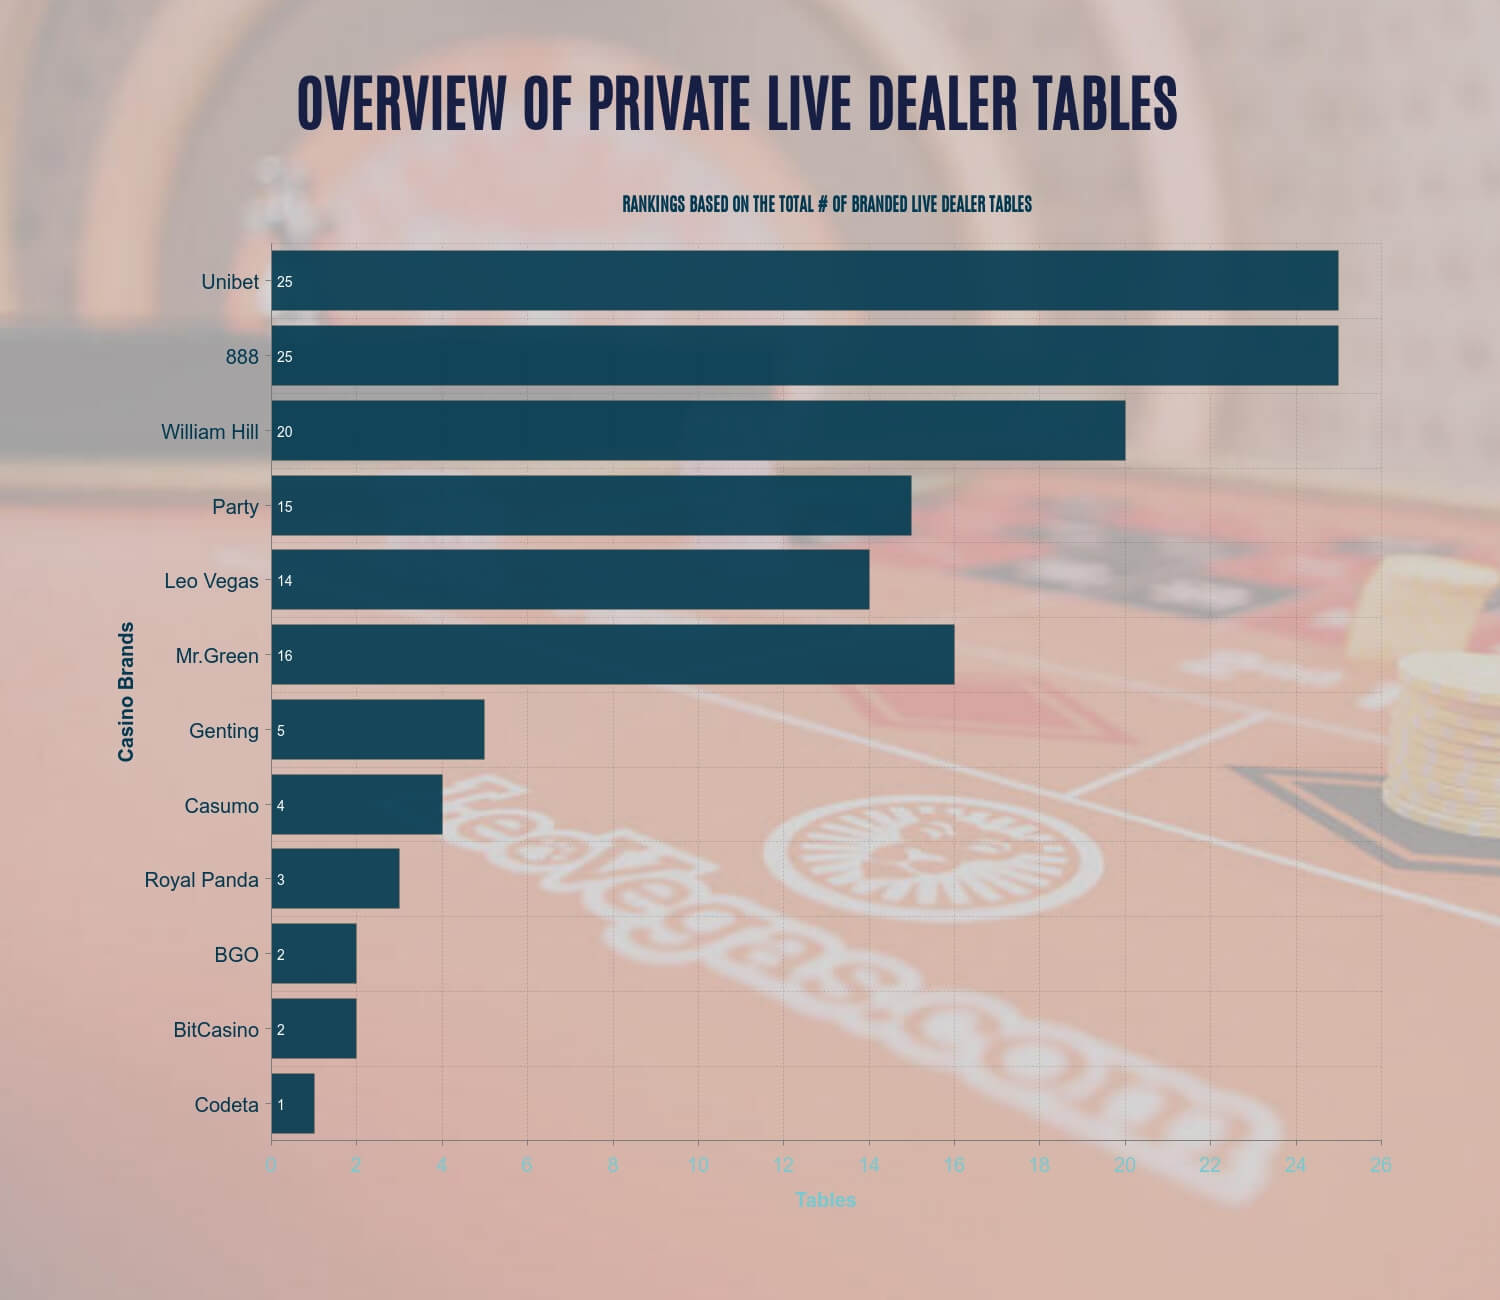 Visual comparison of the number of private live dealer tables per casino